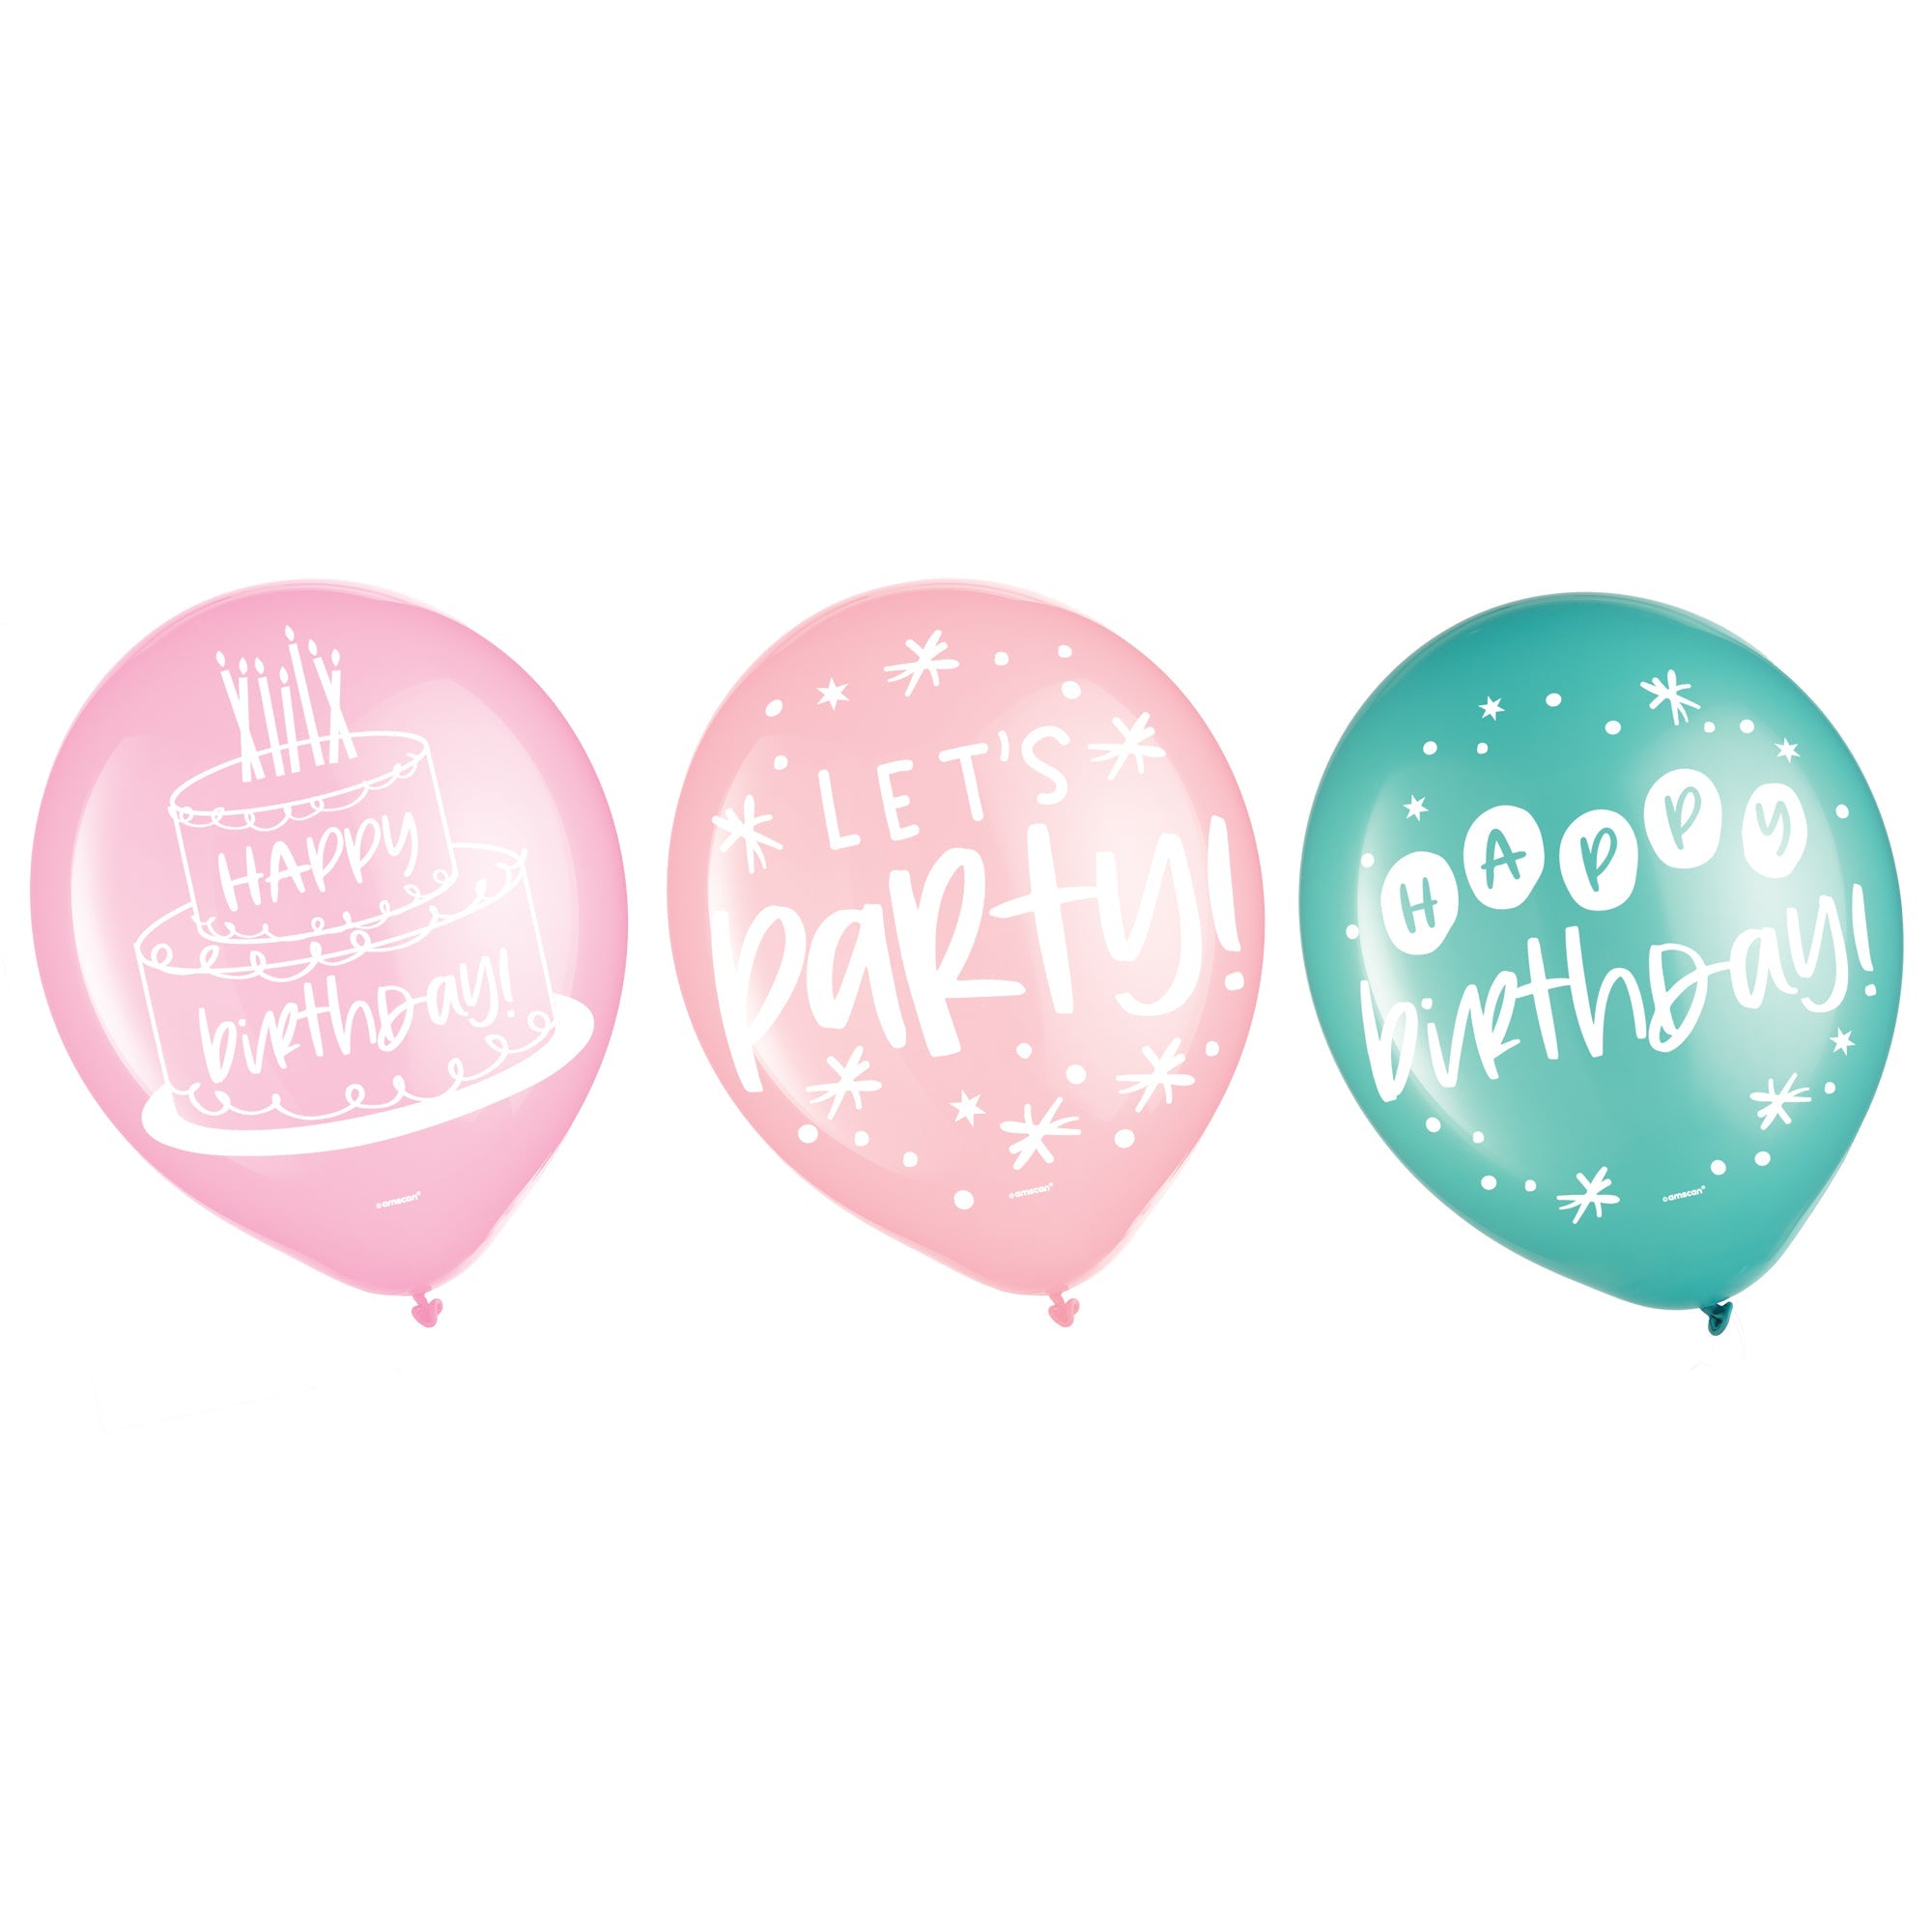 Happy Cake Day 15 Printed Latex Balloons  Asst. Colors  12in